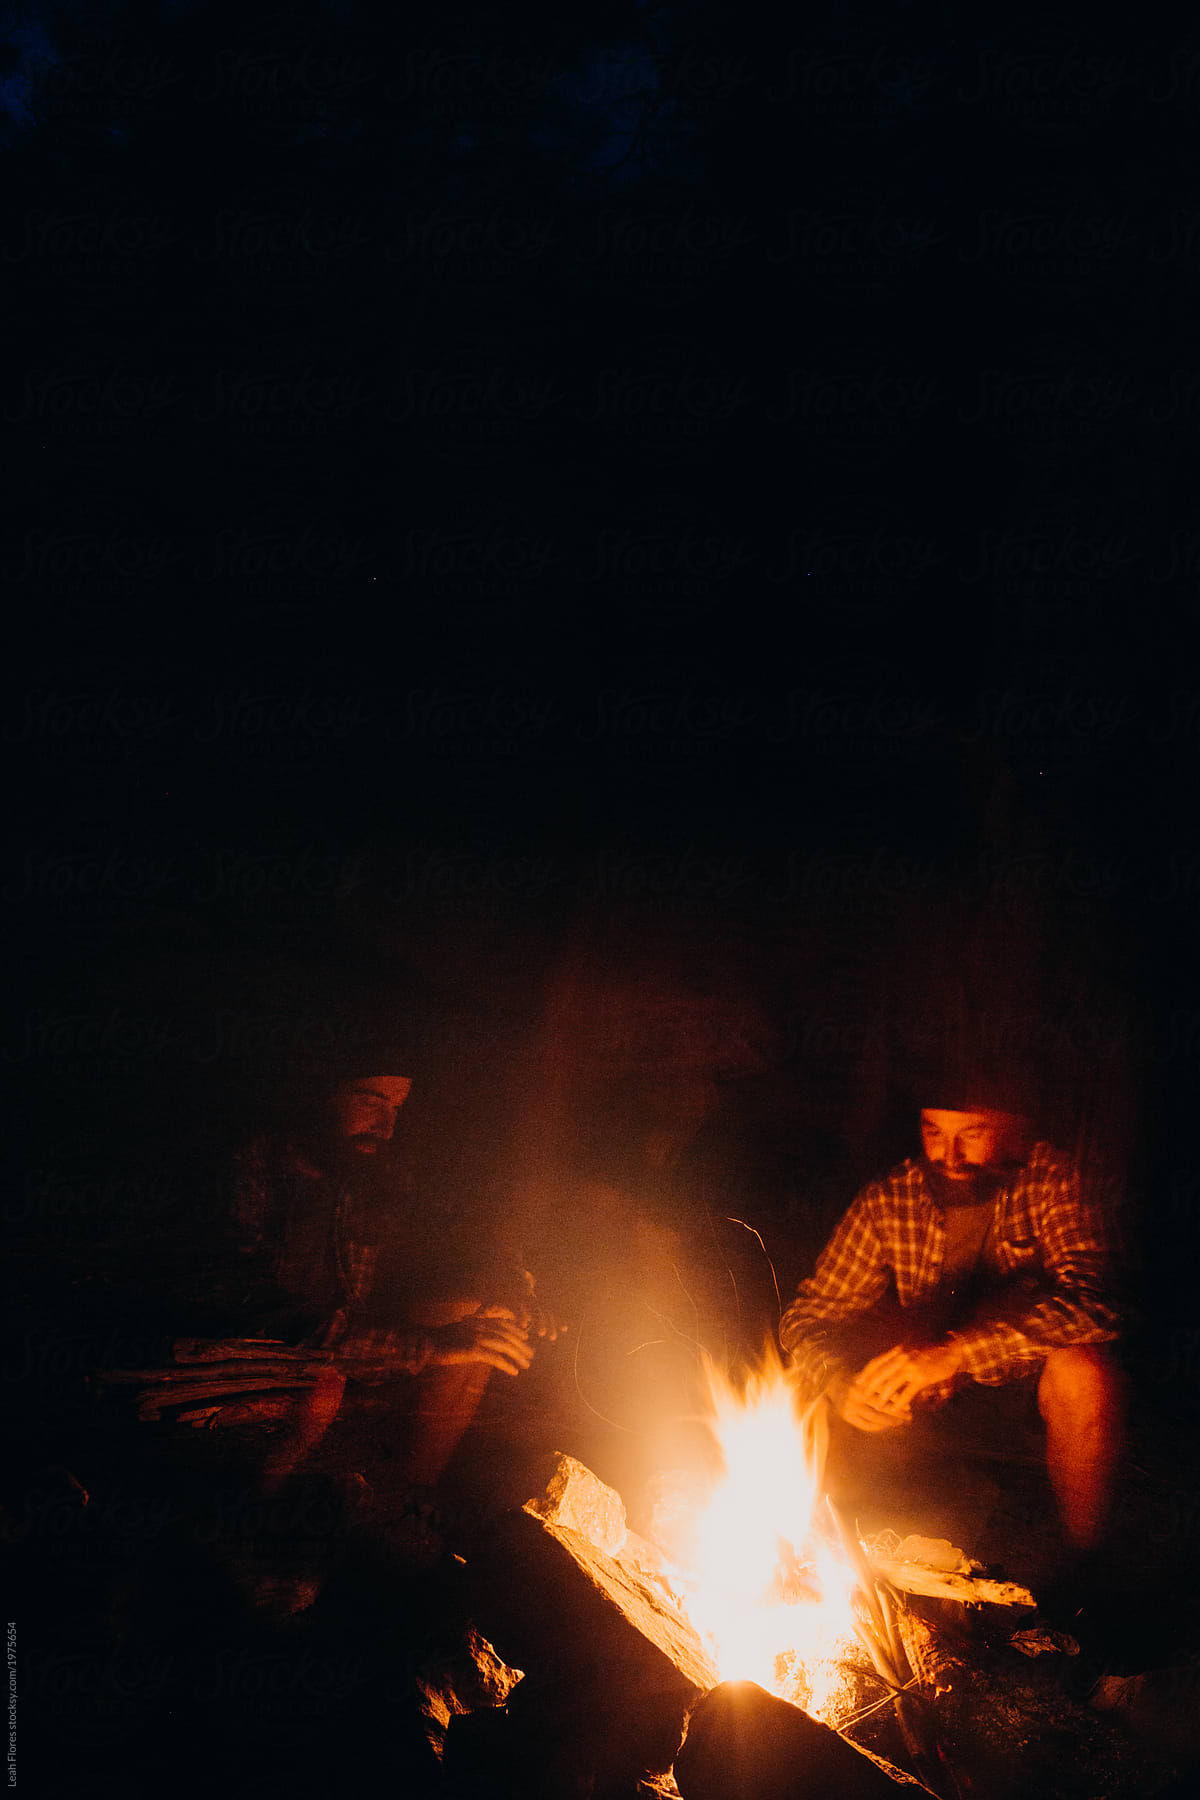 Long Exposure Image Of Man Duplicated By Campfire